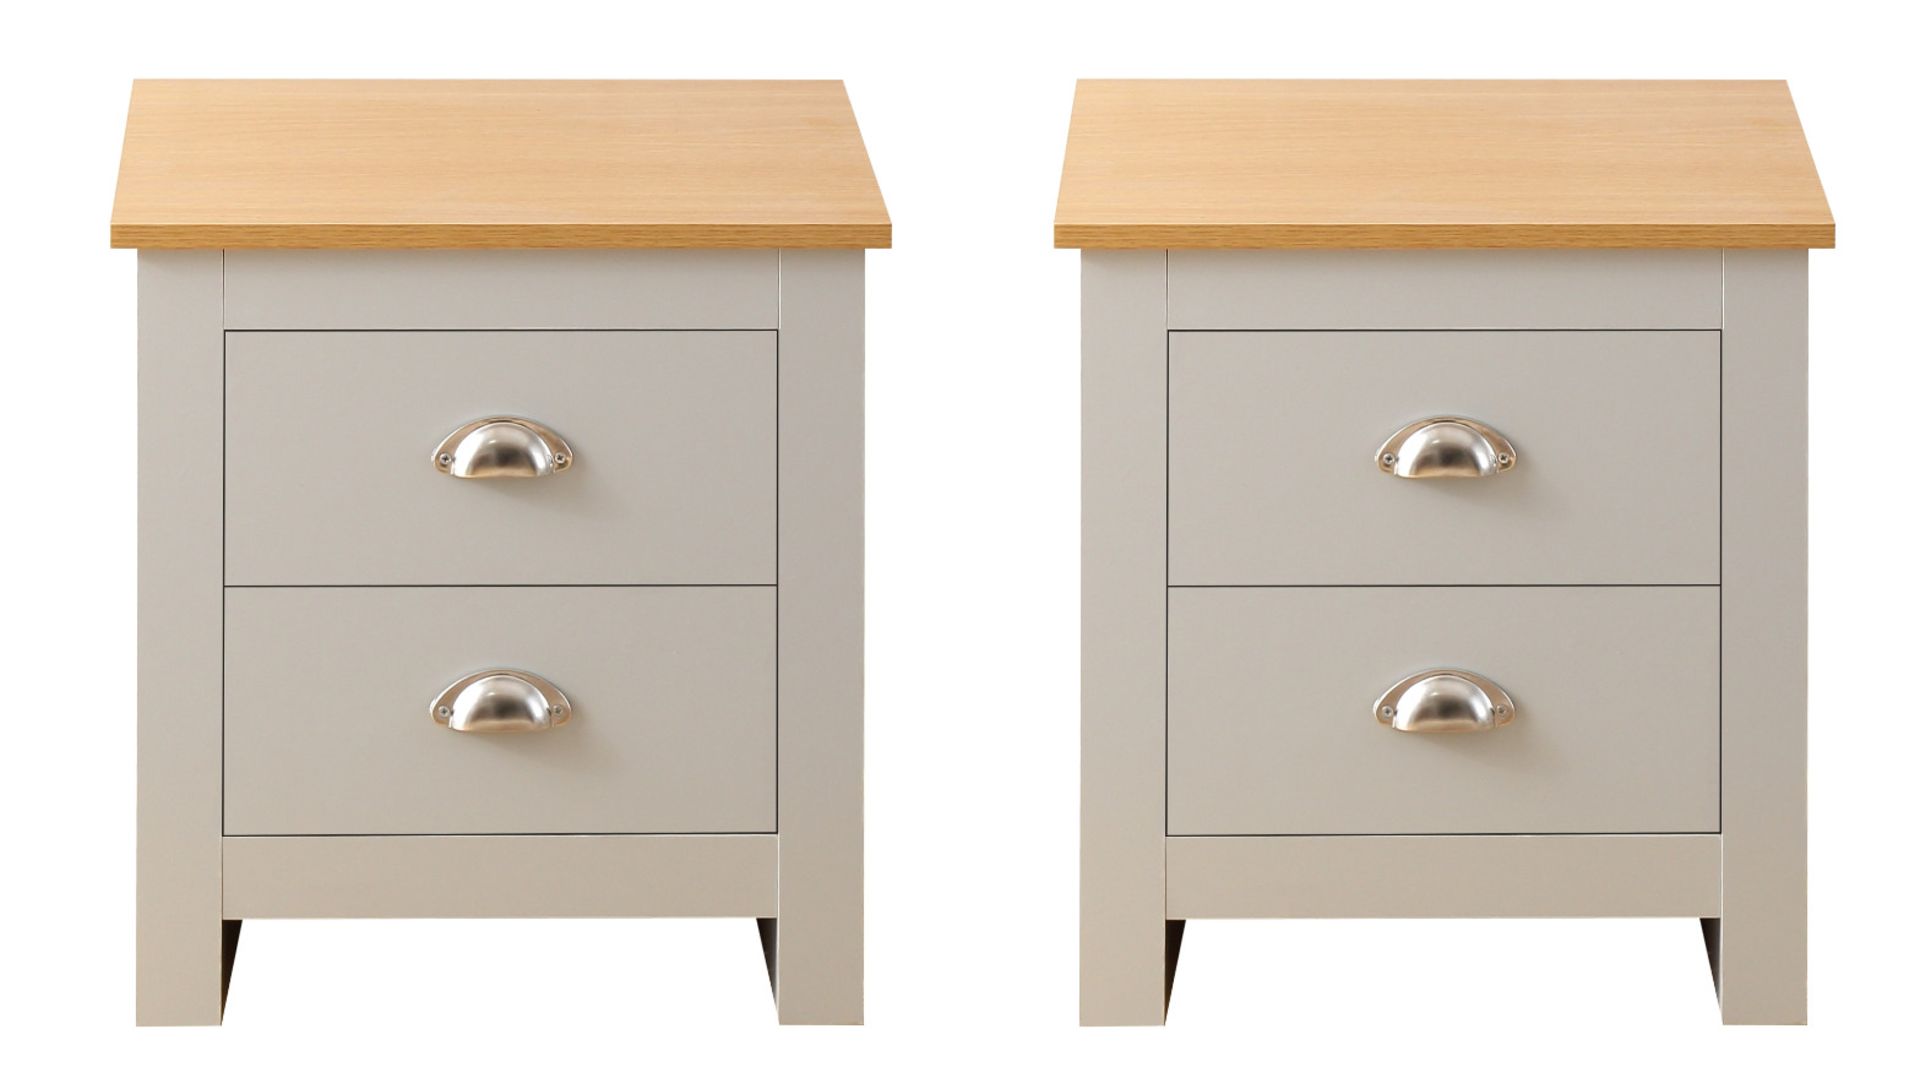 PAIR OF GREY WITH OAK TOP SHAKER-INSPIRED STYLISH DESIGN BEDSIDES